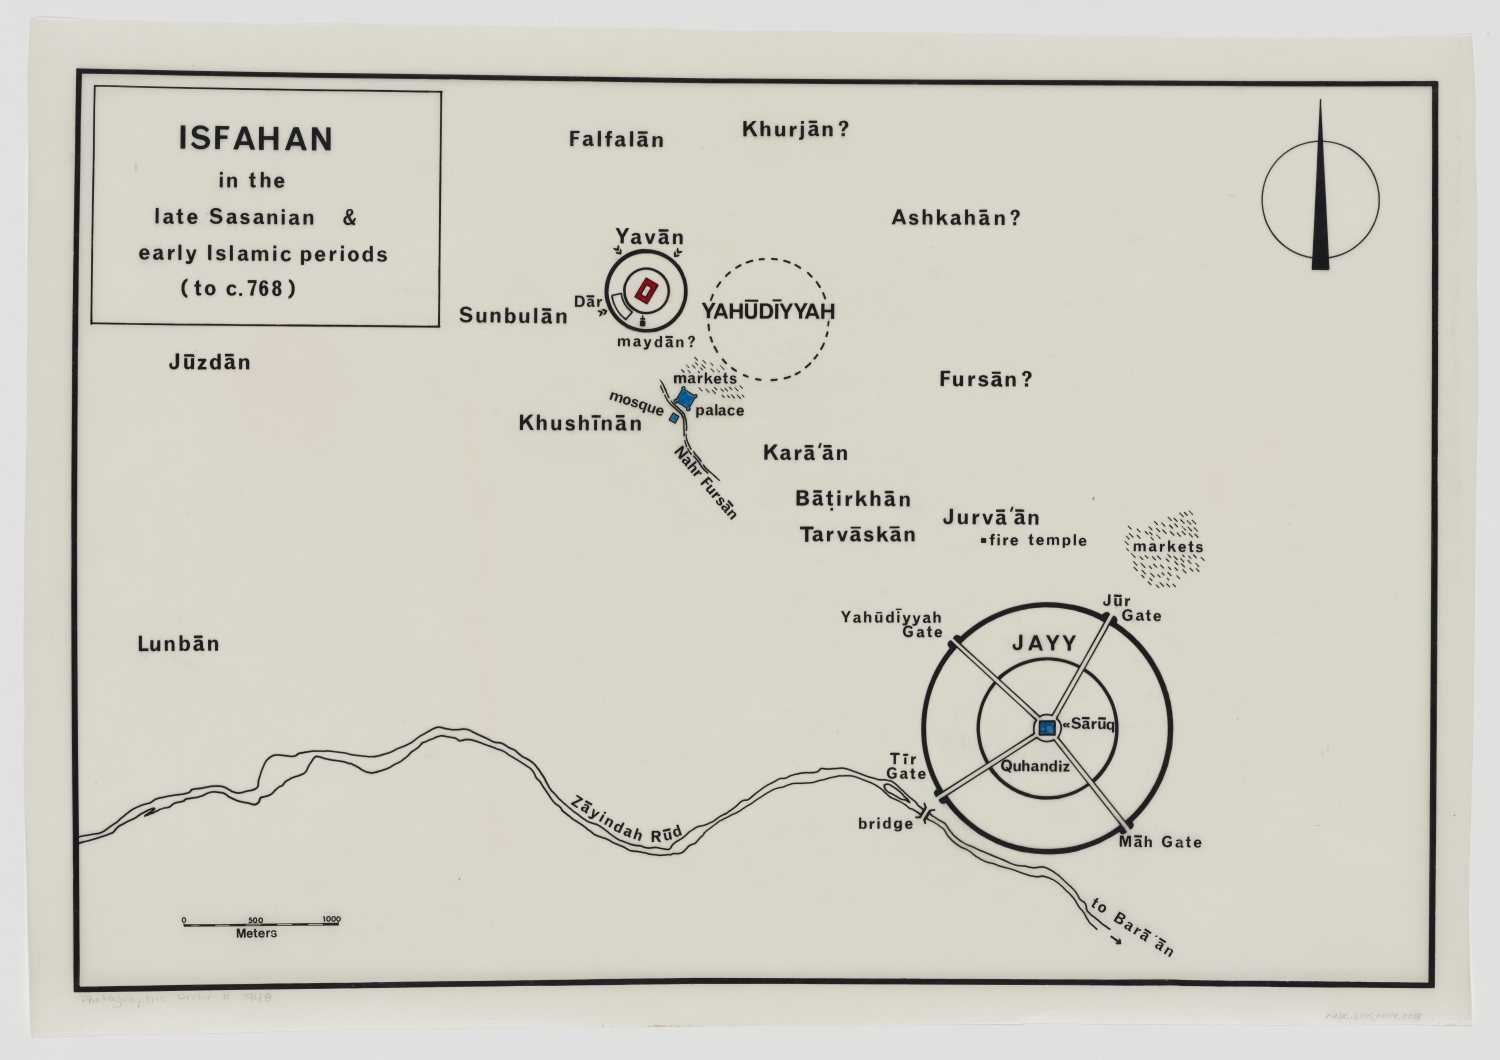 Map of Isfahan area in the late Sasanian and early Islamic periods, showing settlements and walled city of Jayy.